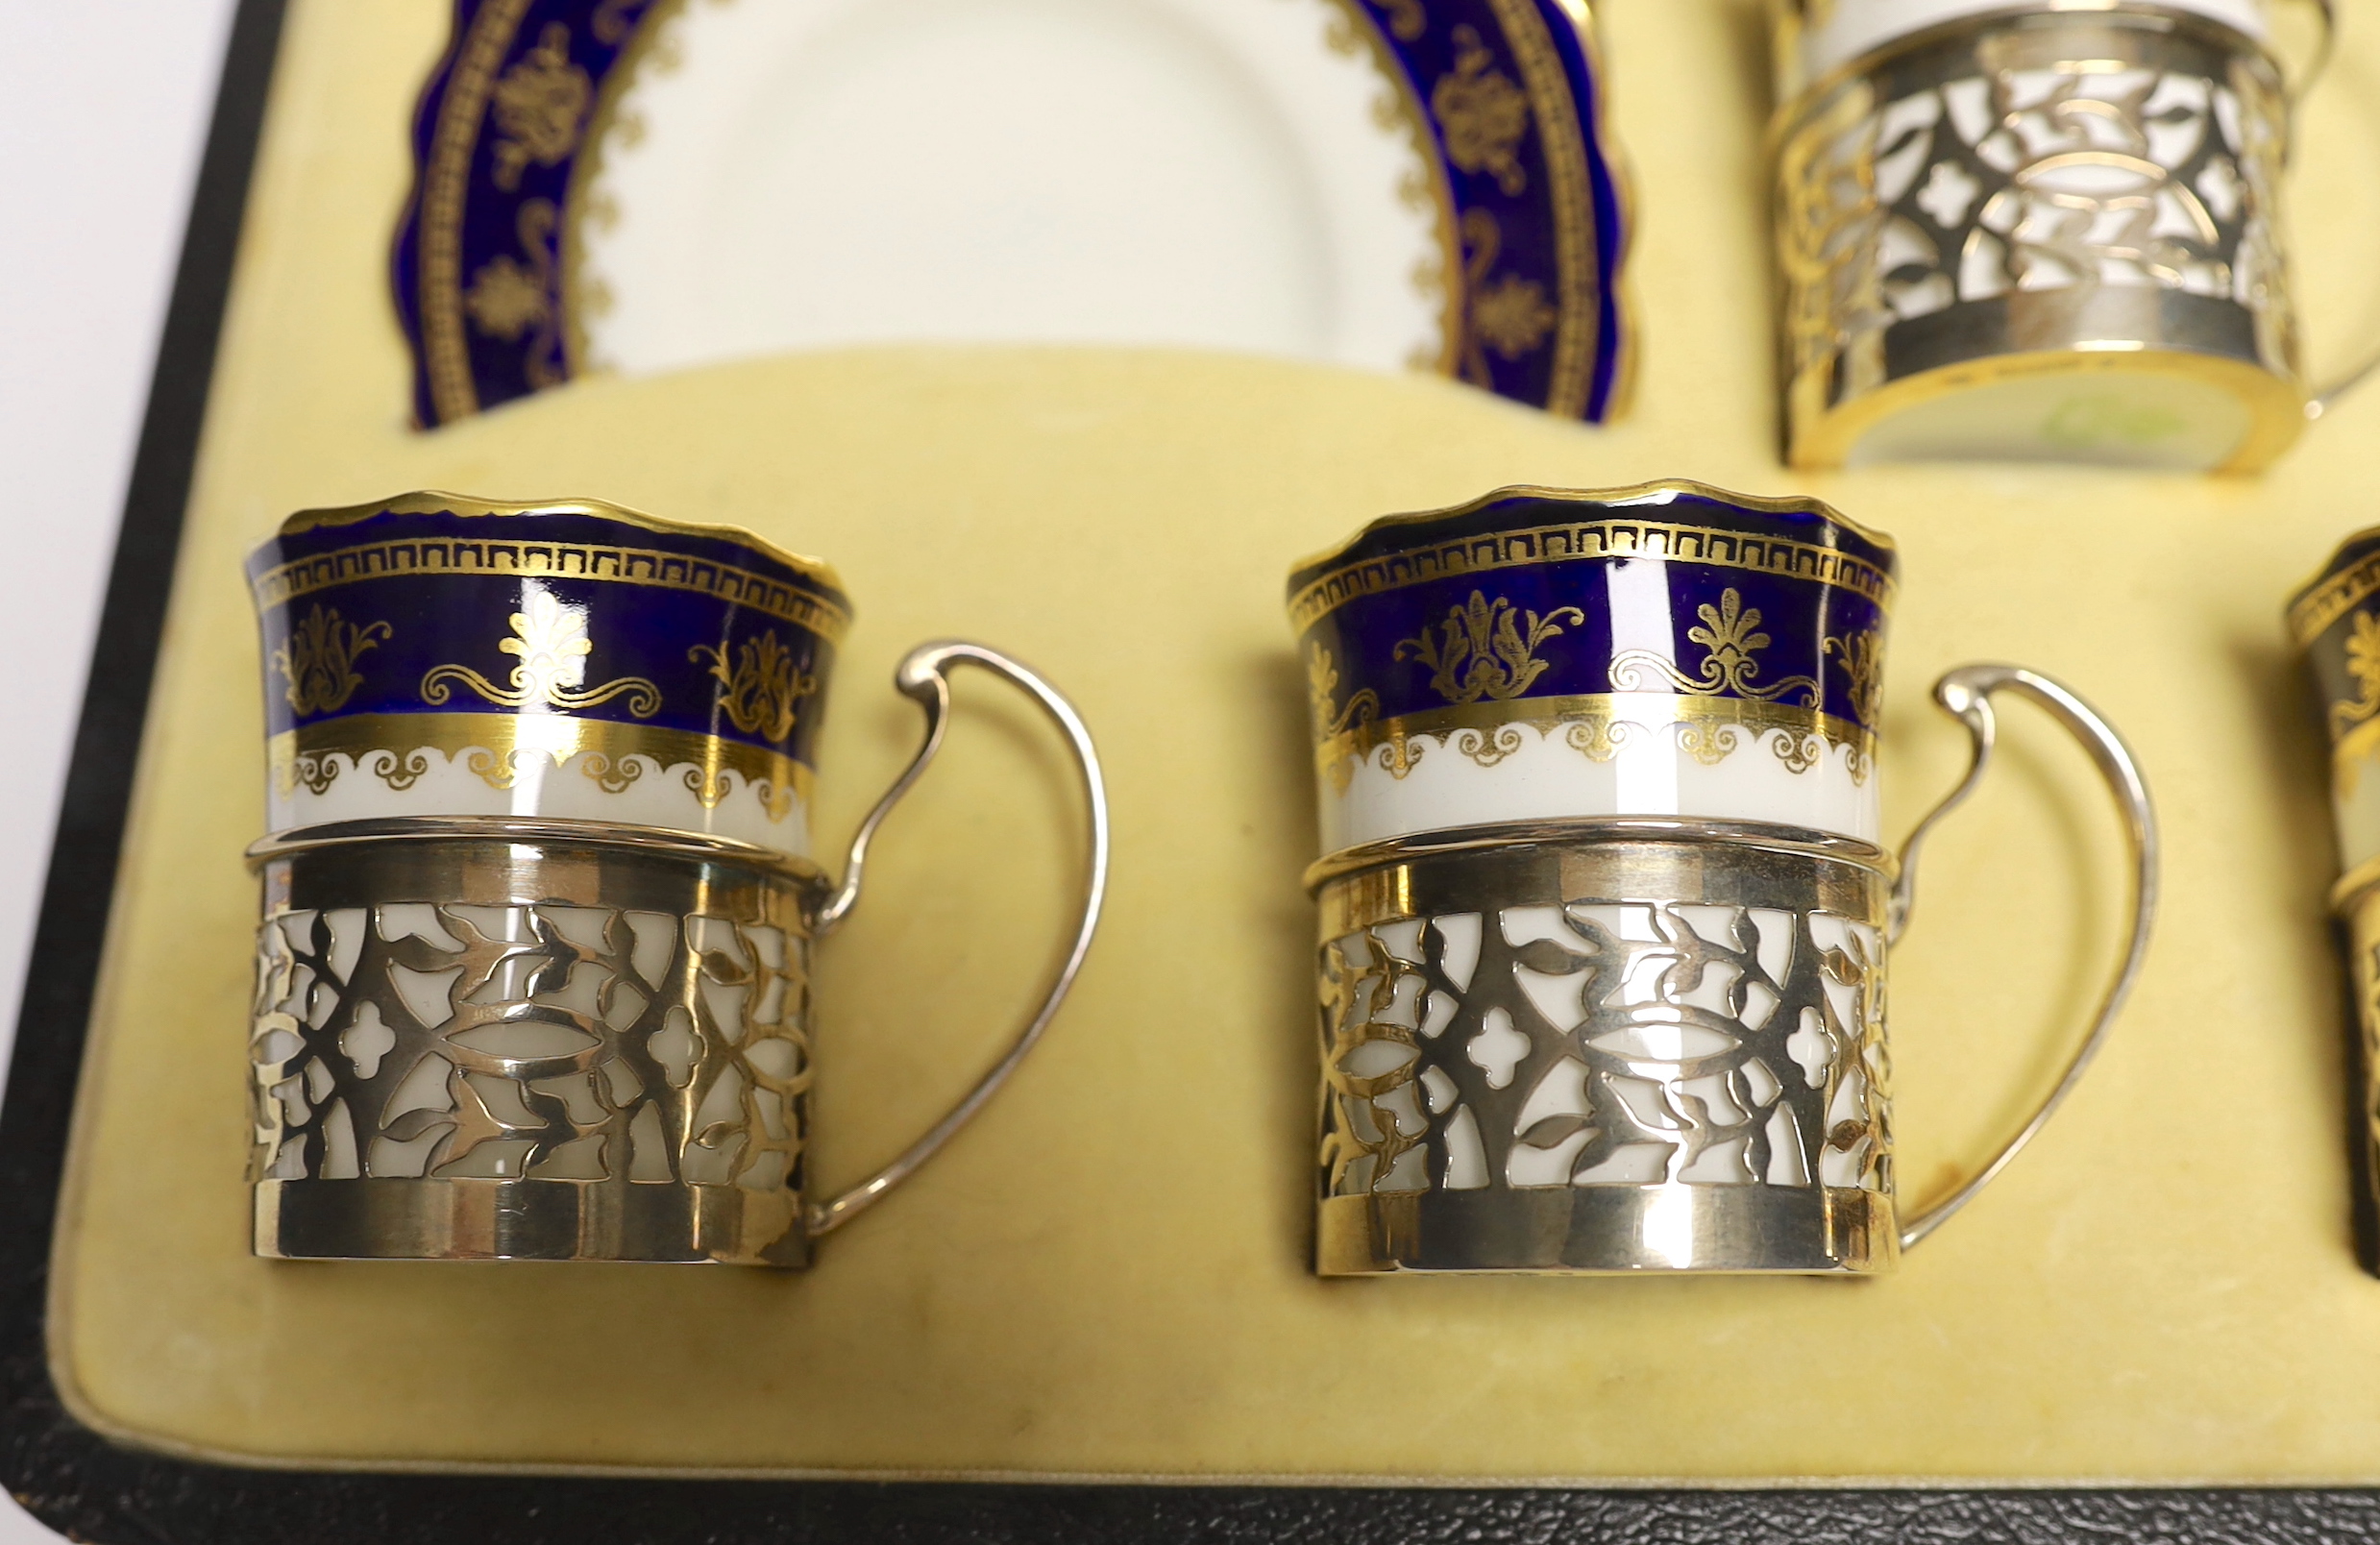 A cased George V set of six Aynsley coffee cans and saucers, the cans with pierced silver holders, C.S. Green & Co, Birmingham, 1924, can 57mm.